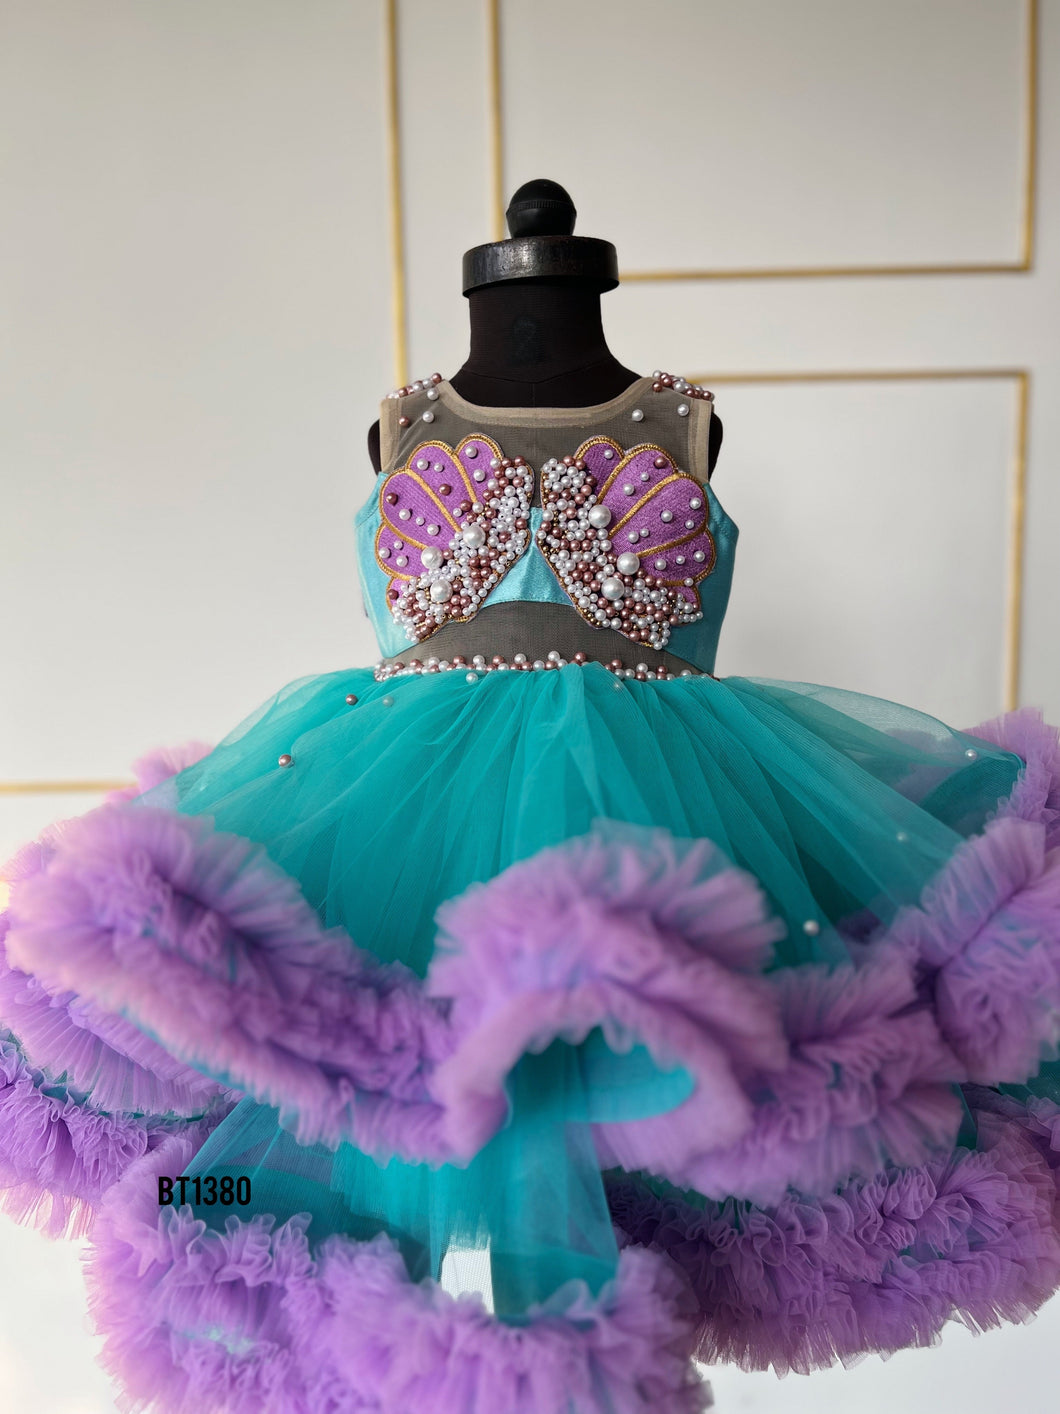 BT1380 Turquoise Butterfly Princess Dress - Spread the Wings of Joy!